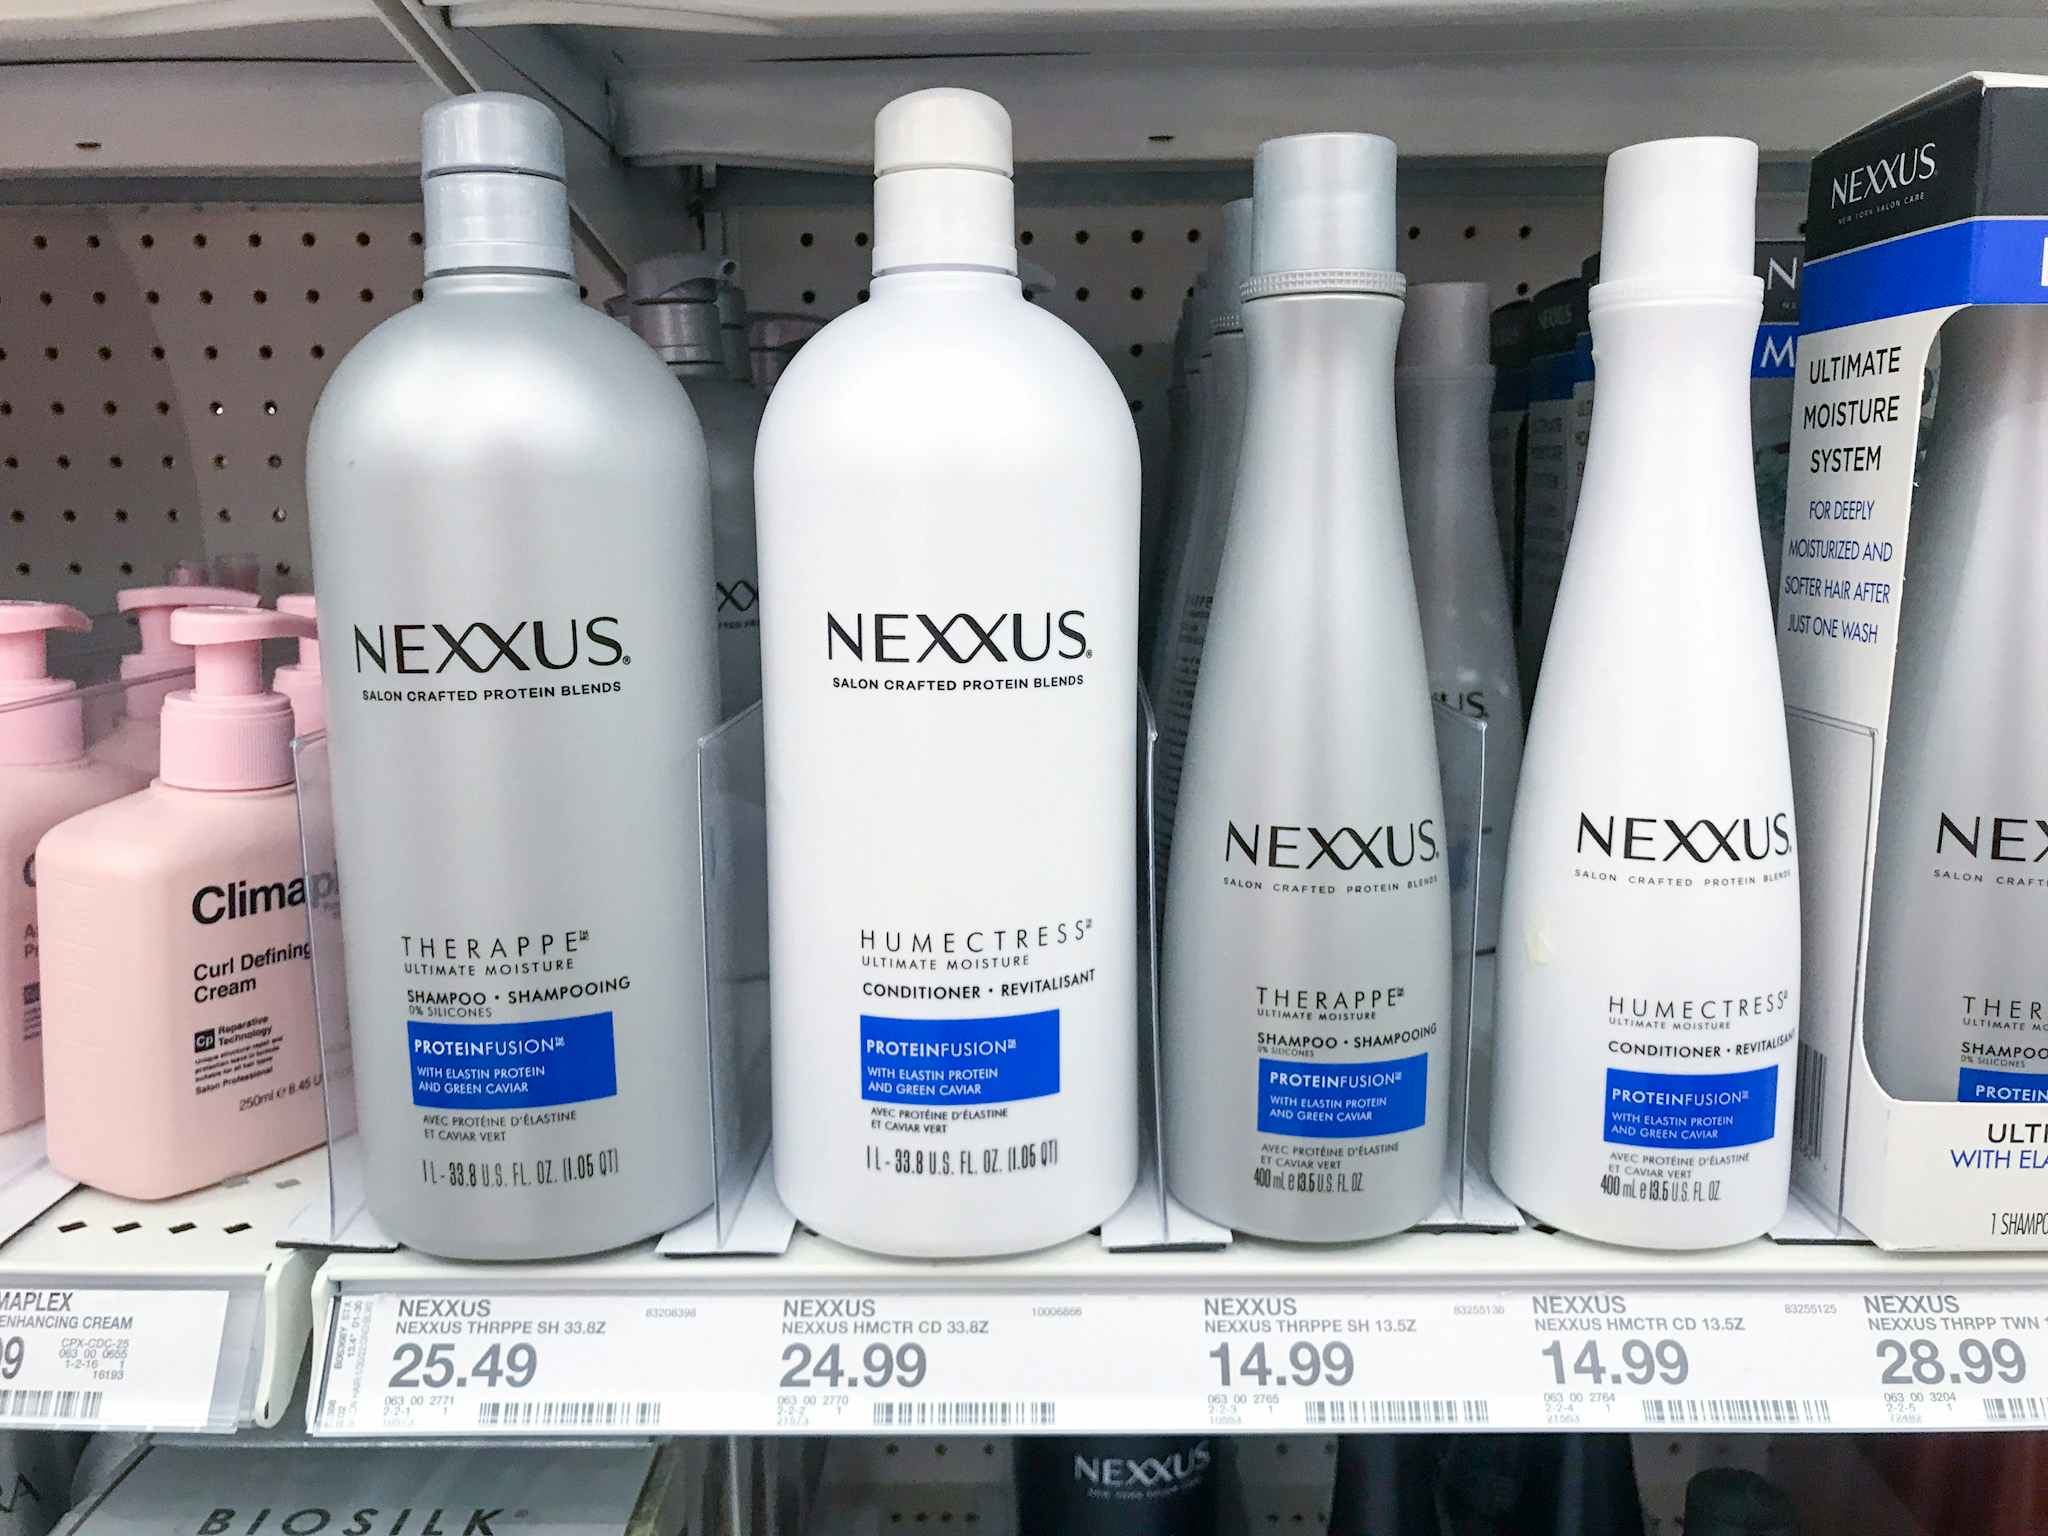 Nexxus Ultimate Moisture hair products on a shelf at Target.